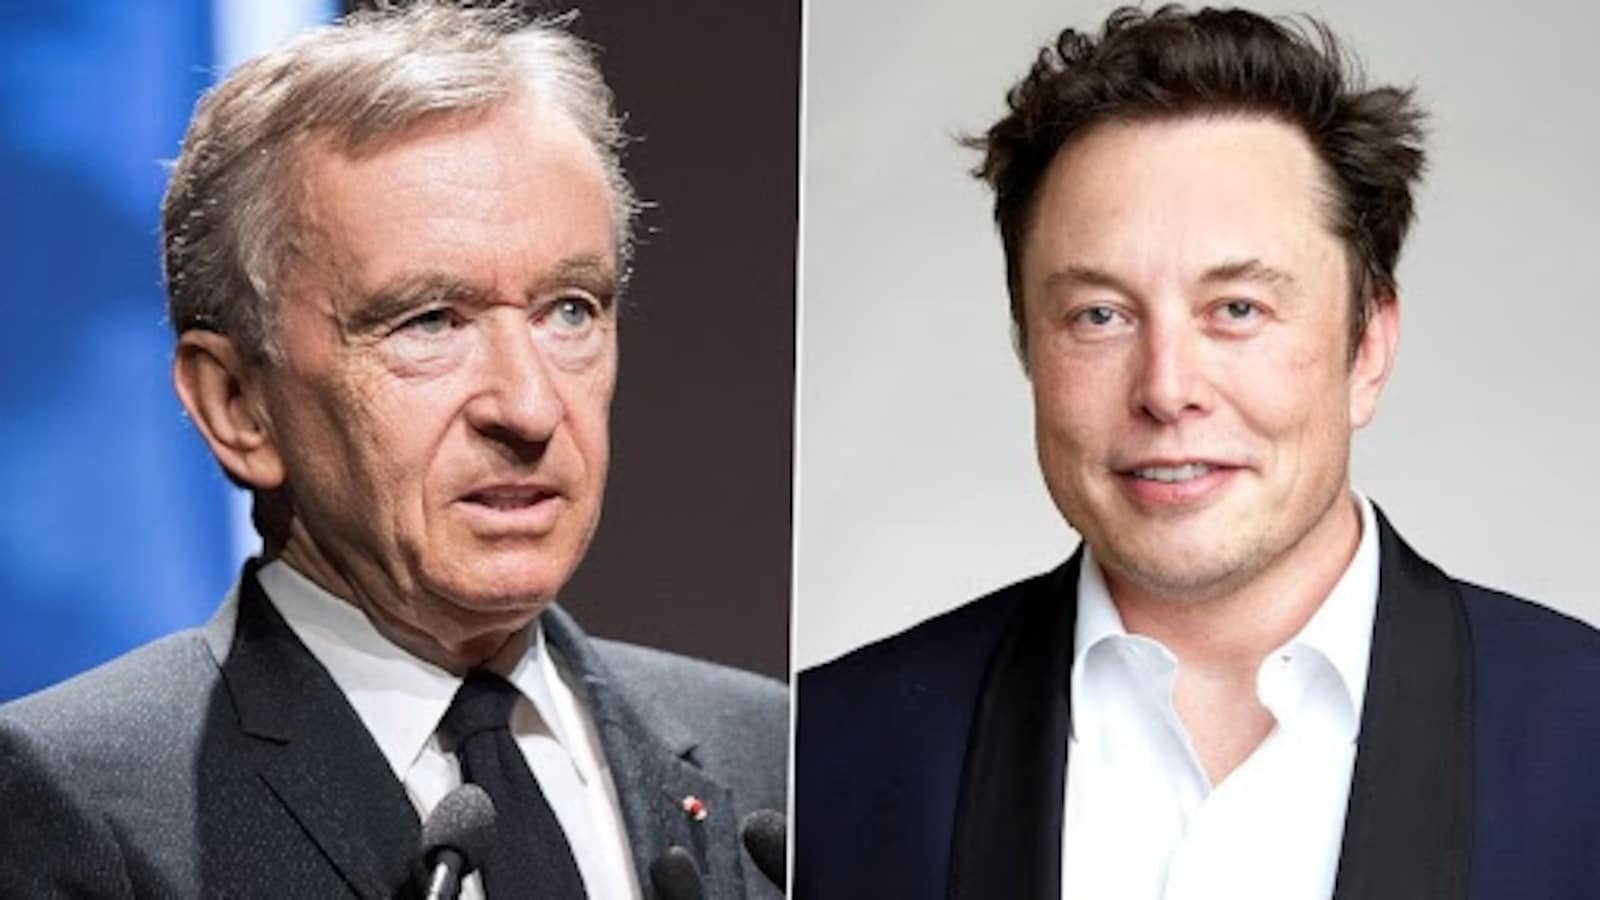 Musk loses world's richest title to Bernard Arnault with Tesla unwinding